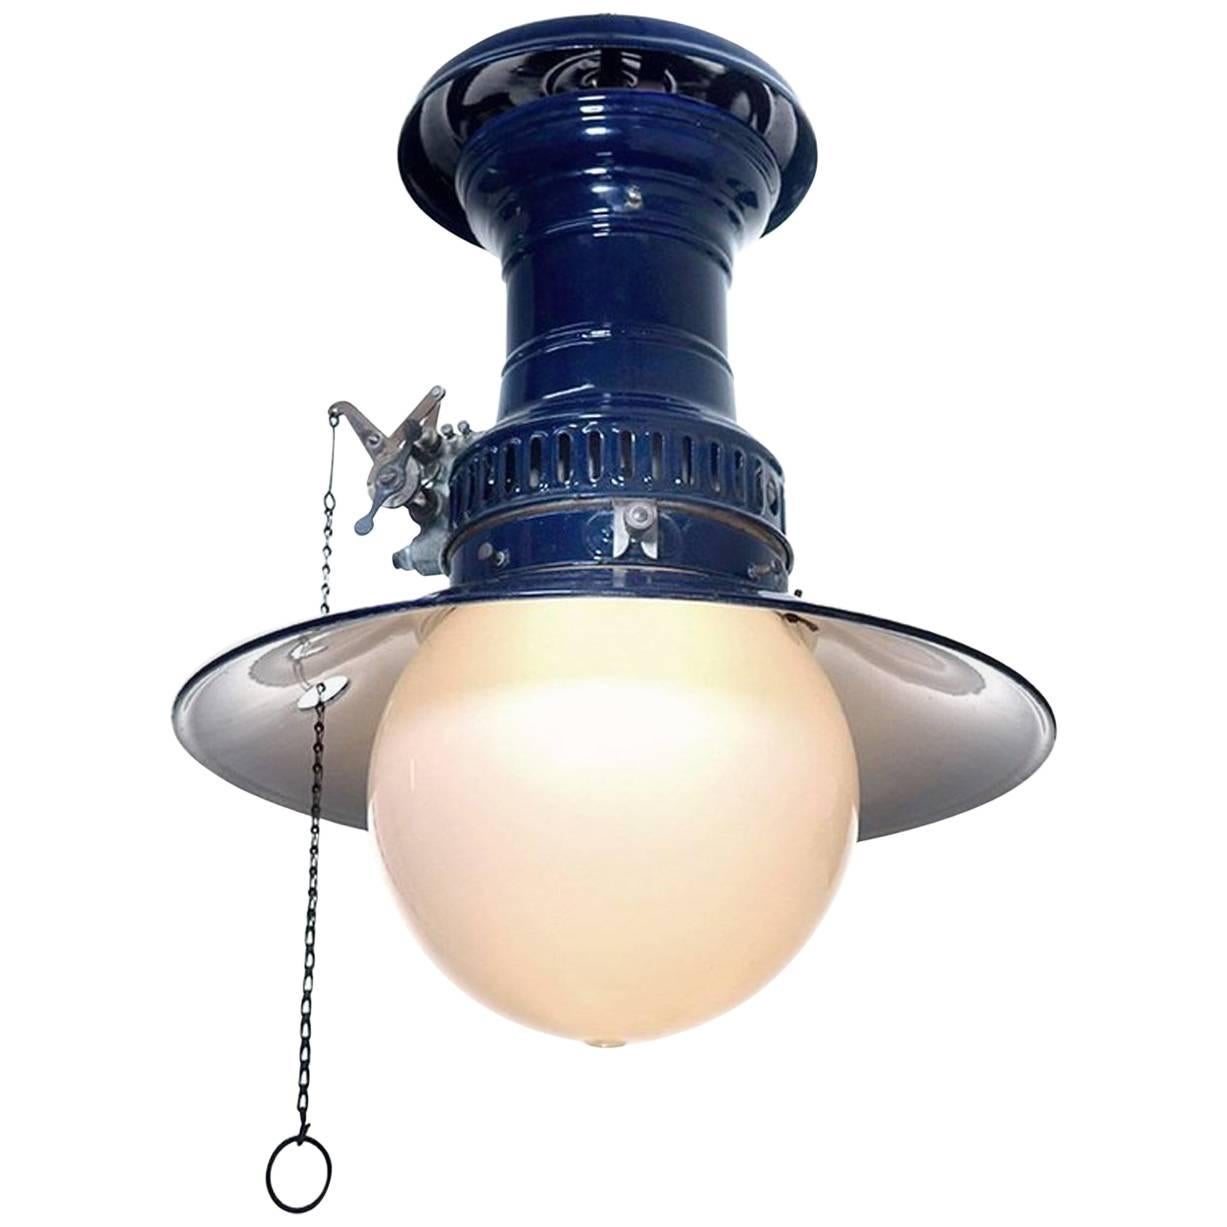 You don't see these in cobalt often. It in beautiful condition with the original globe and matching shade. Note the hole in the shade to allow the chain to hang straight. We kept all the original gas components when wiring for a standard bulb and